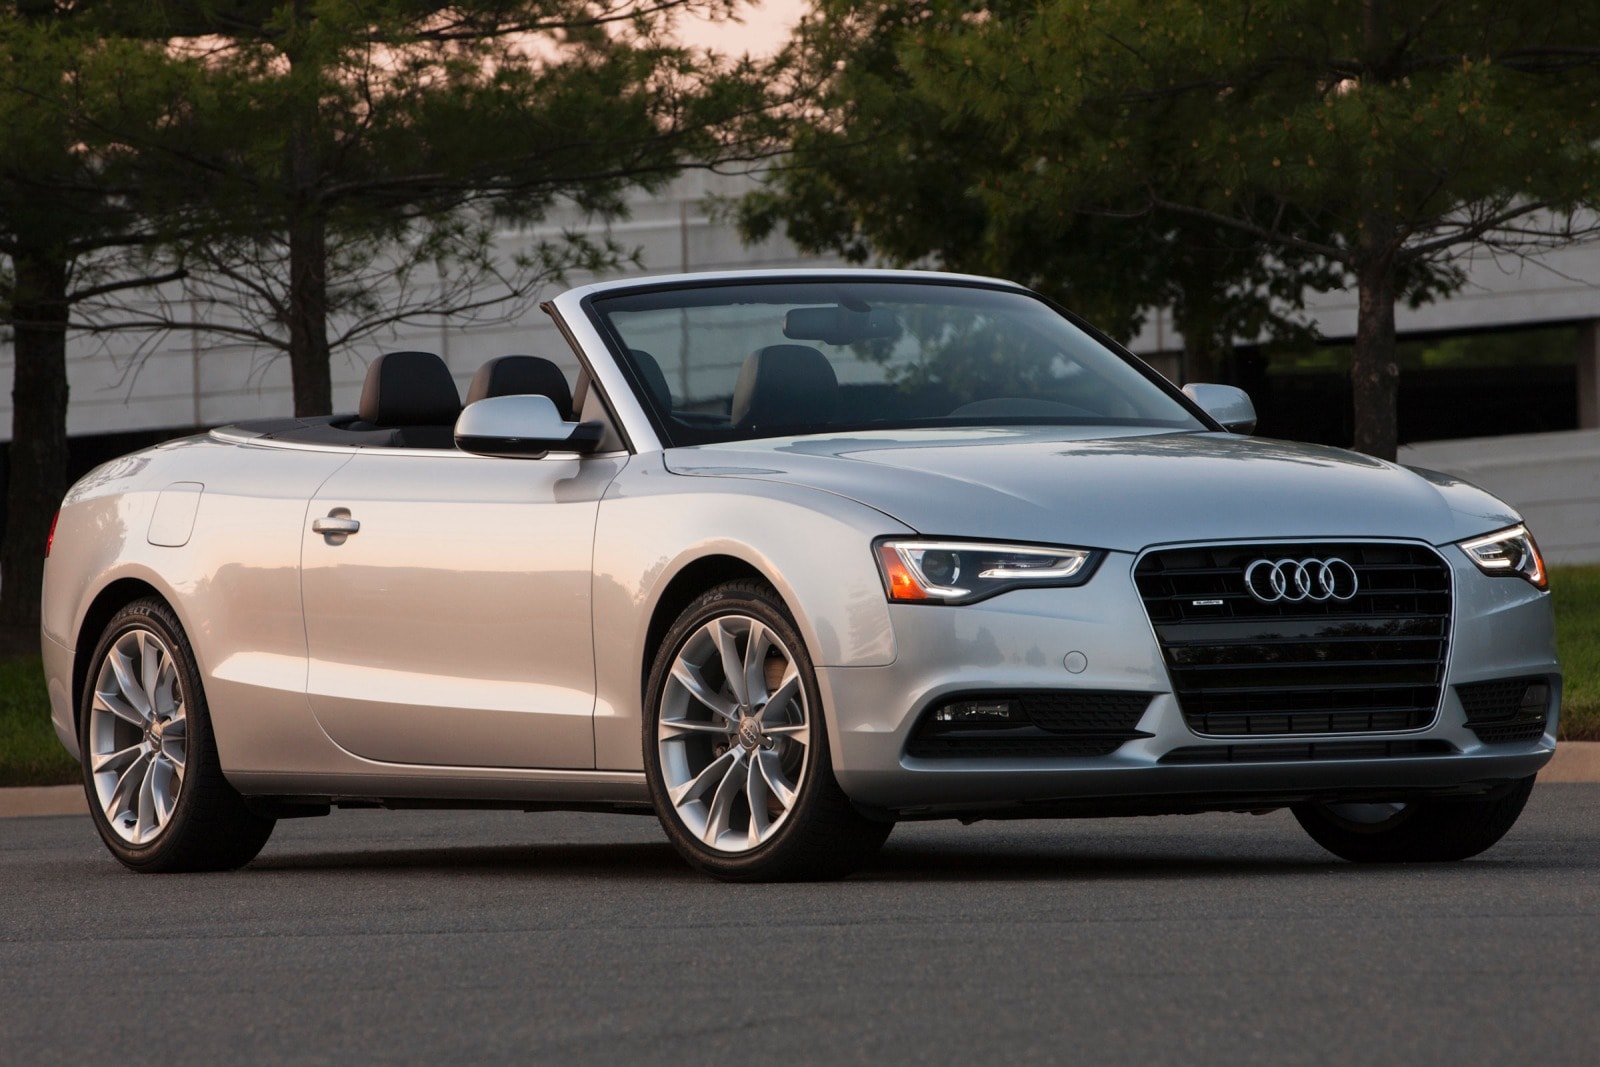 Used 2015 Audi A5 Convertible Review | Edmunds